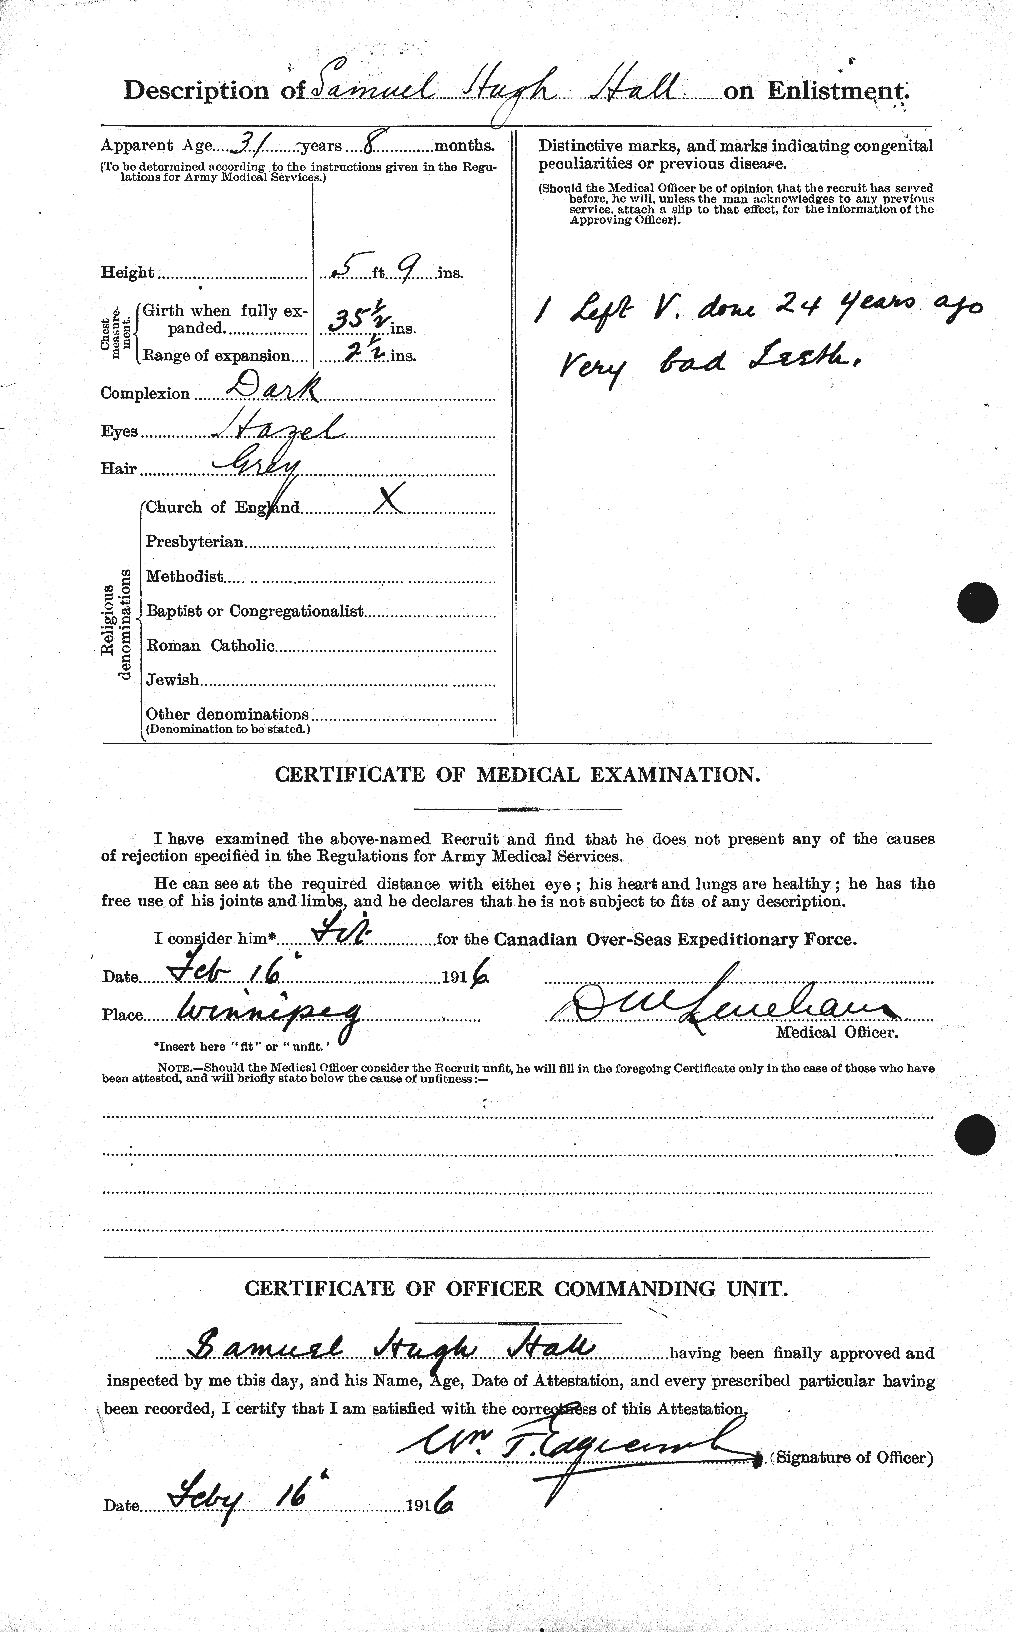 Personnel Records of the First World War - CEF 370769b